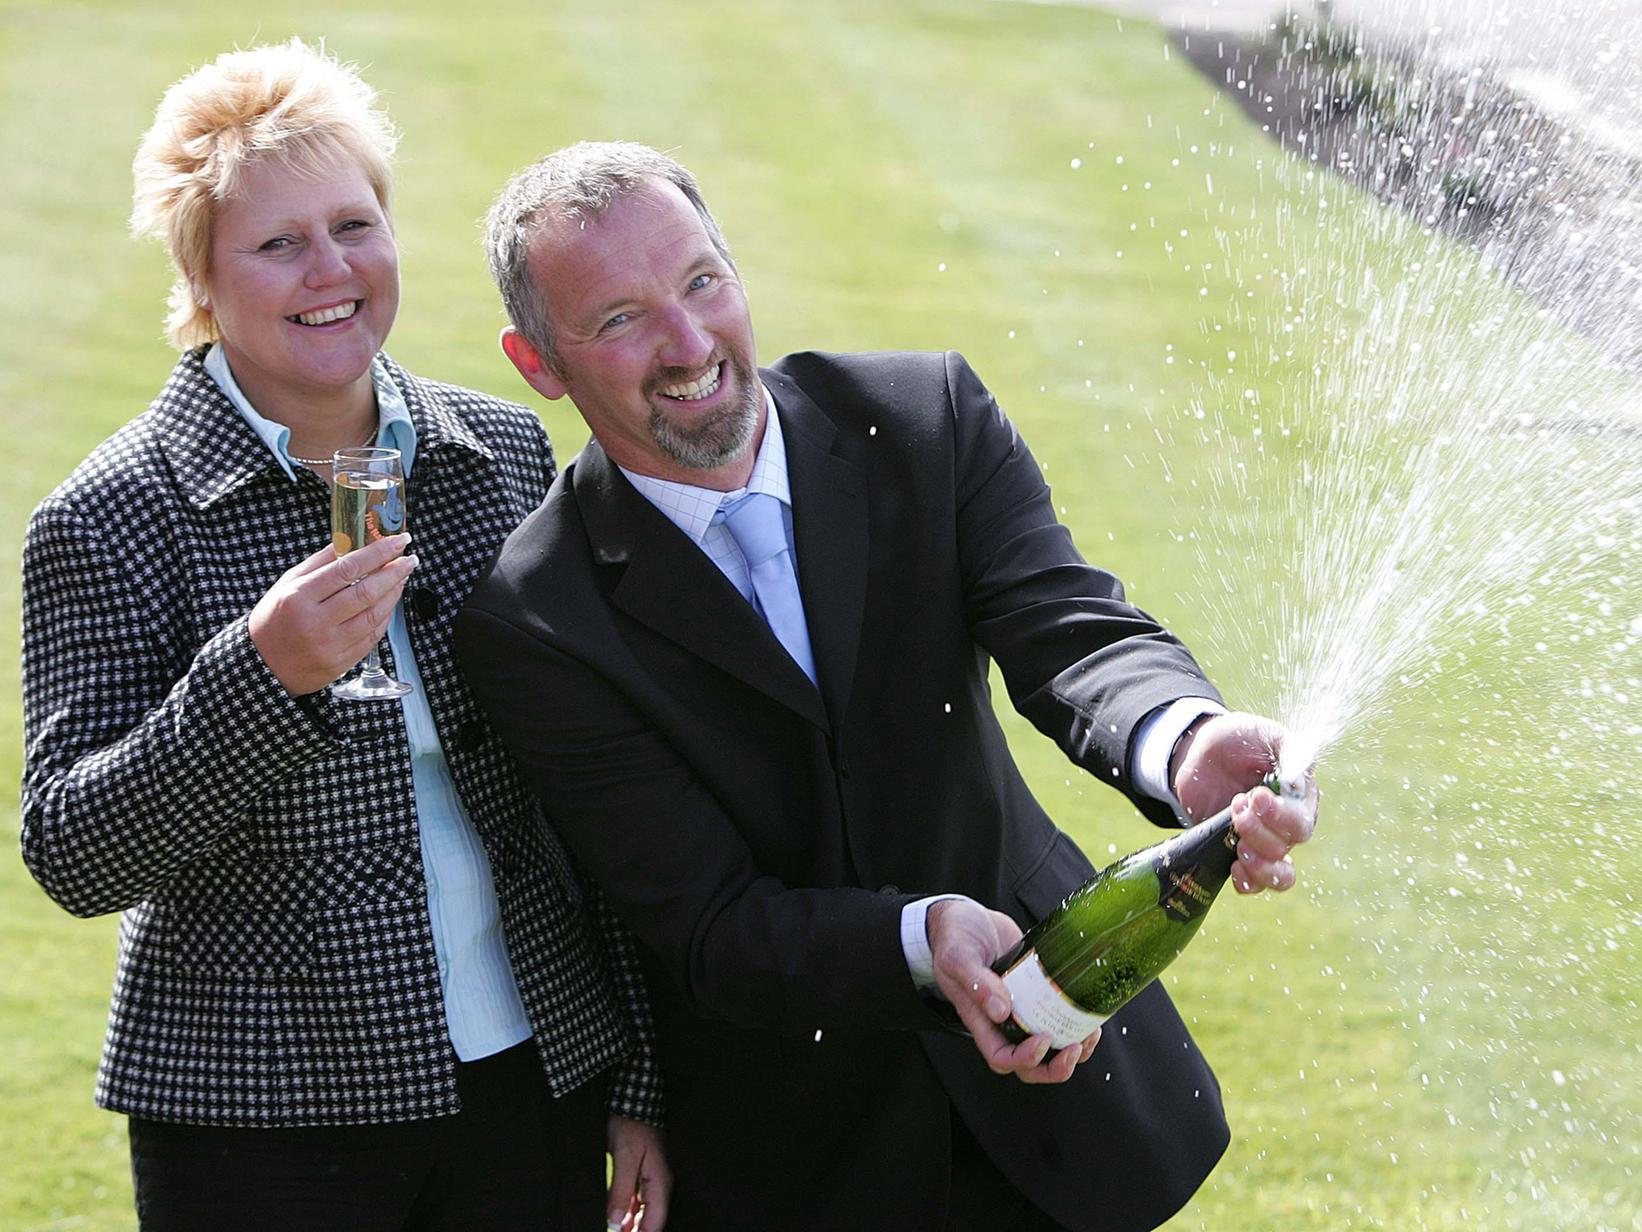 Milkman Colin Bradley, of Preesall, with wife Pauline after scooping 1.4m on the lottery in 2005